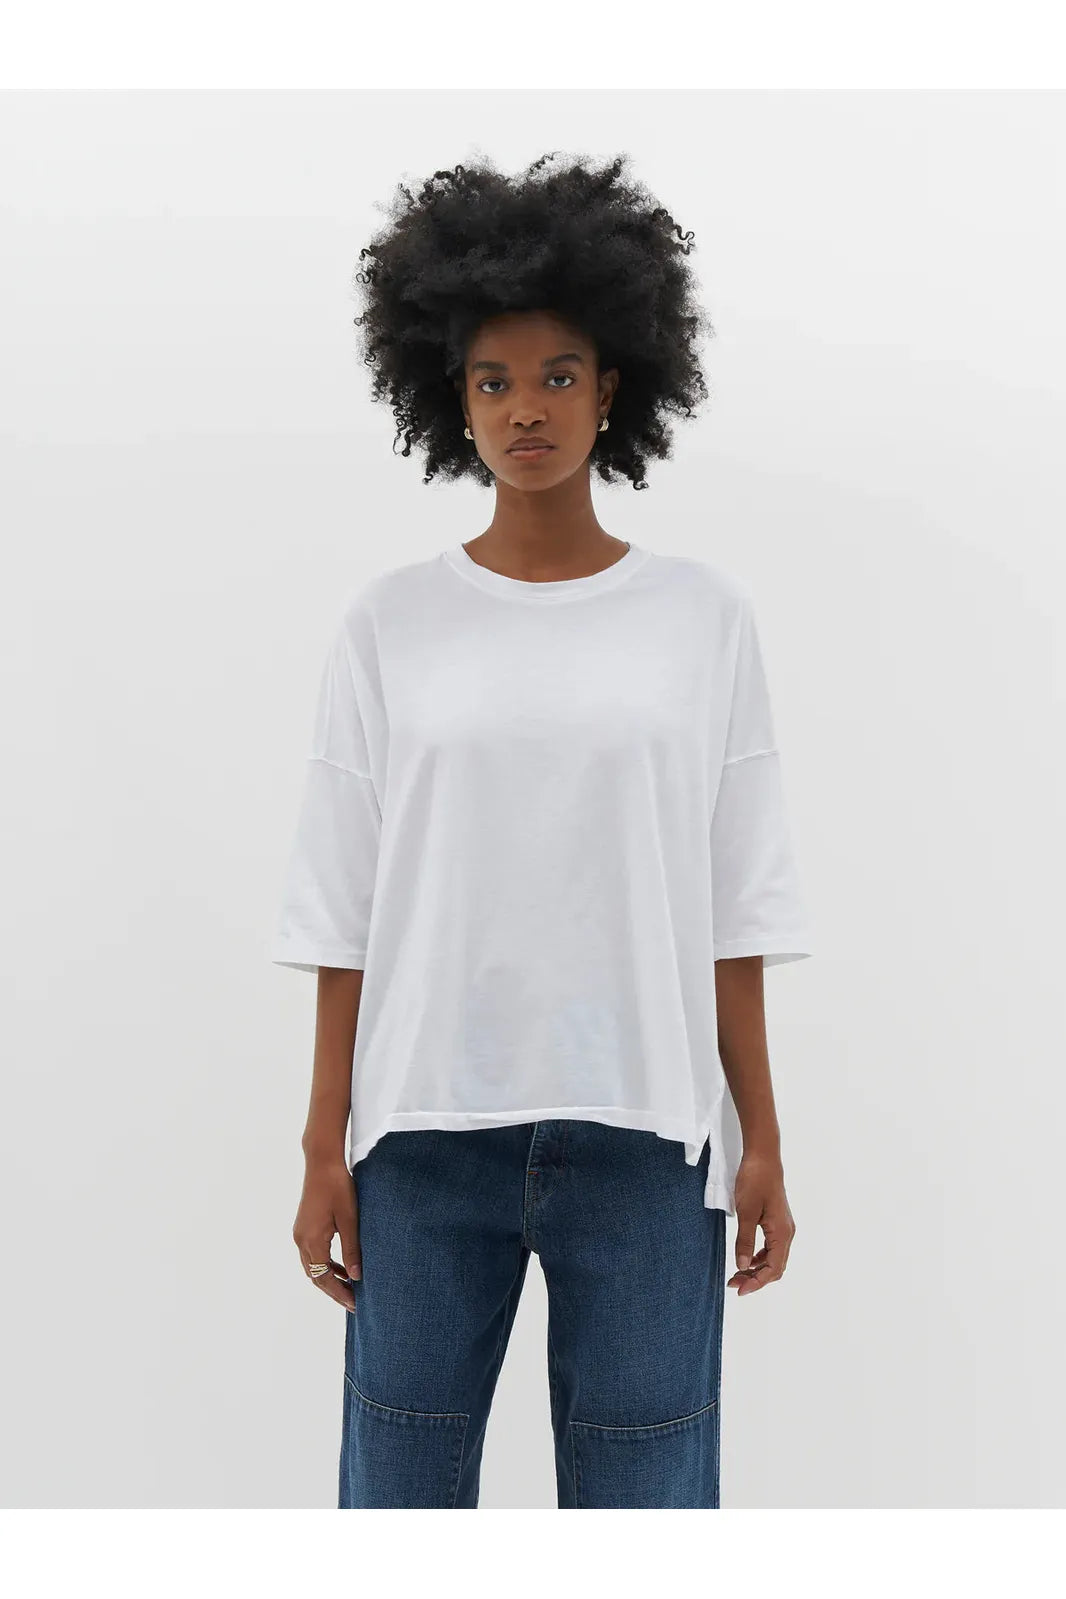 Slouch Side Step Short Sleeve T-shirt in White by Bassike